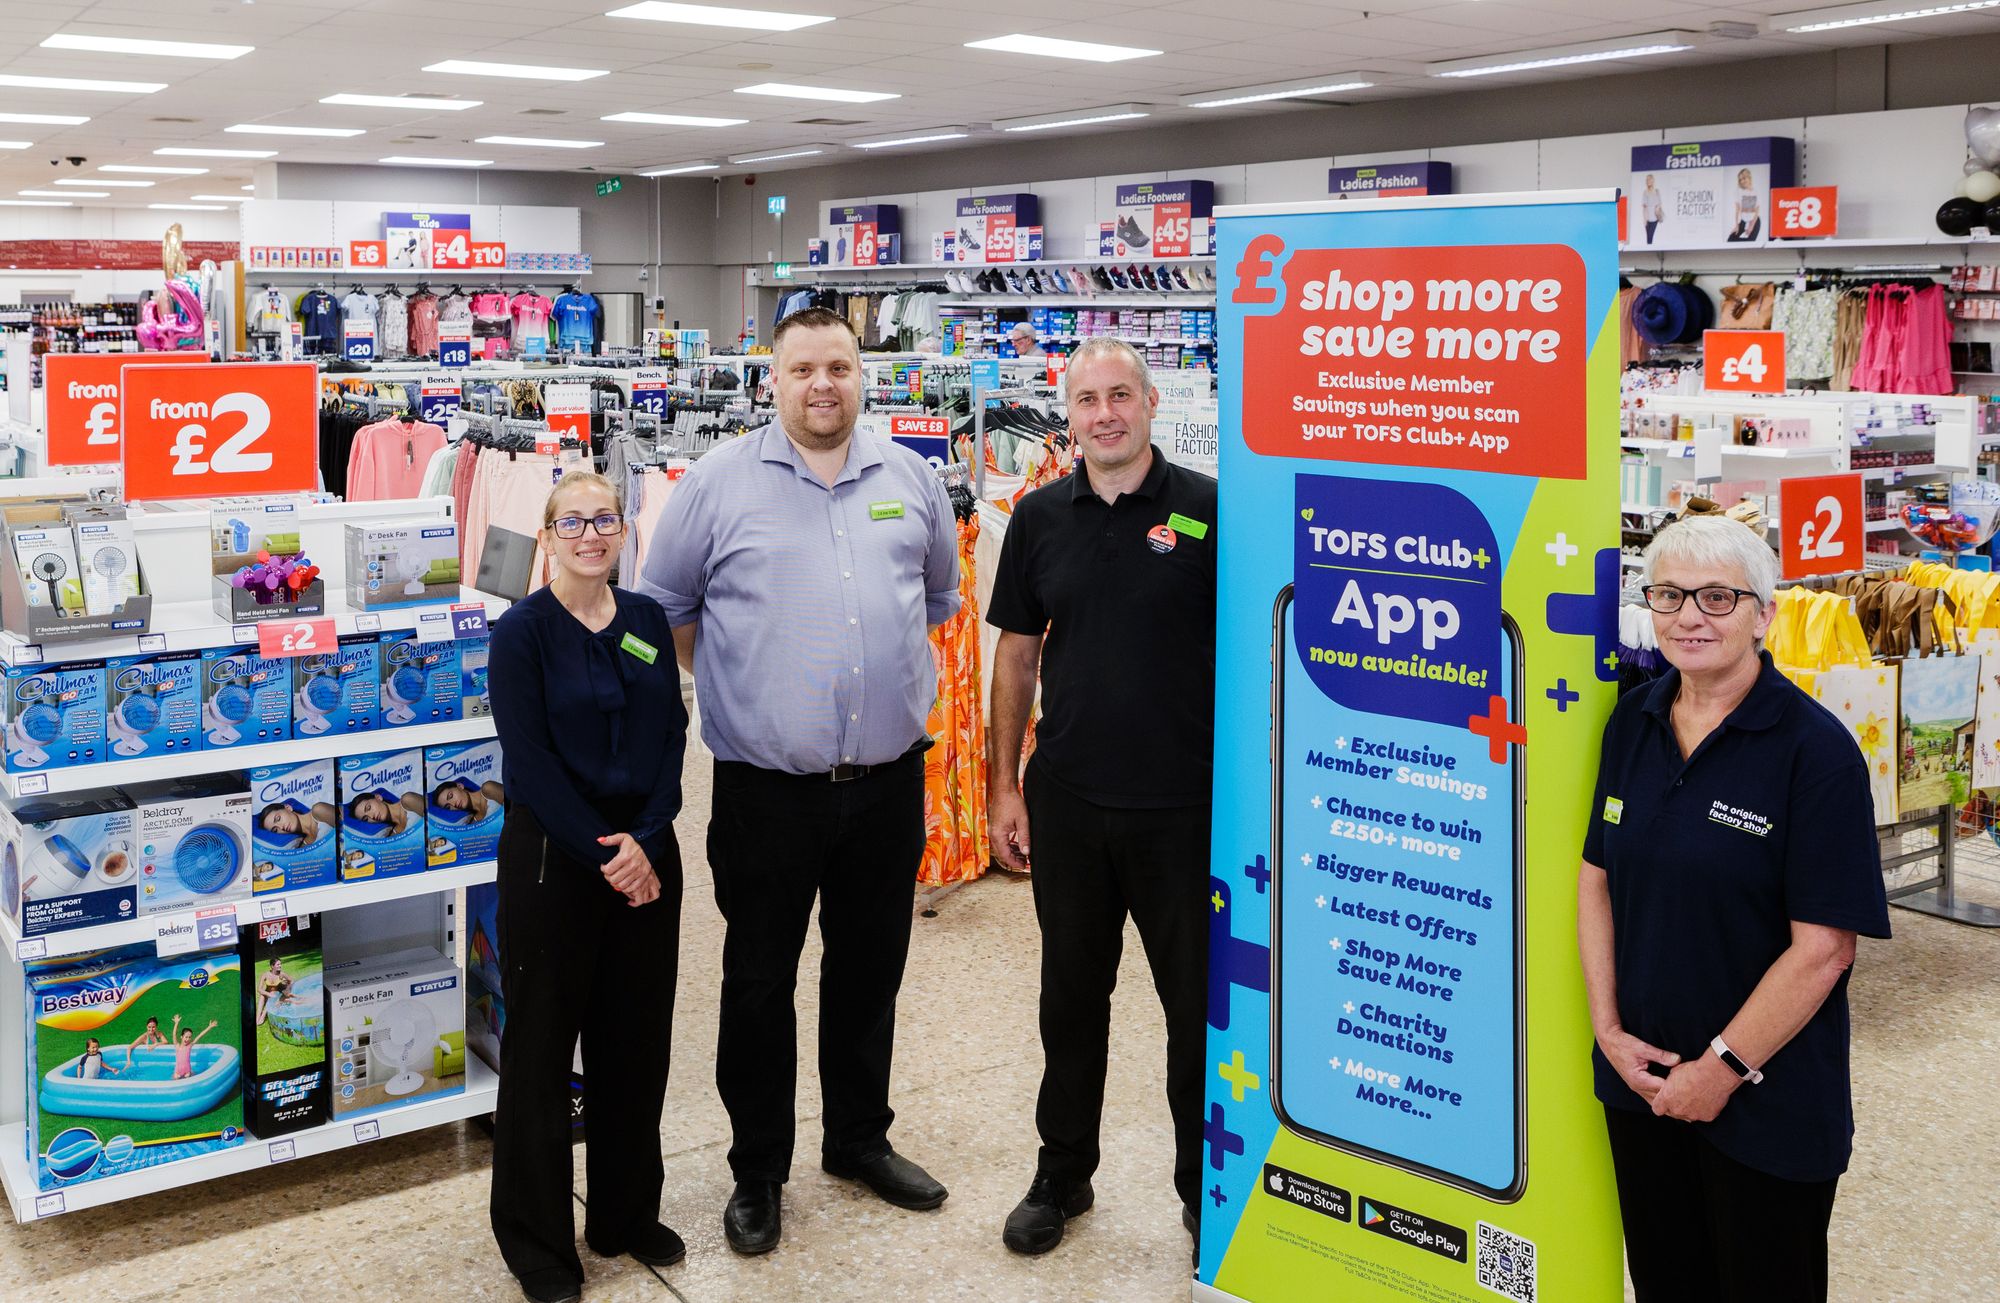 Central England Co-op partners with The Original Factory Shop in Cambridgeshire town